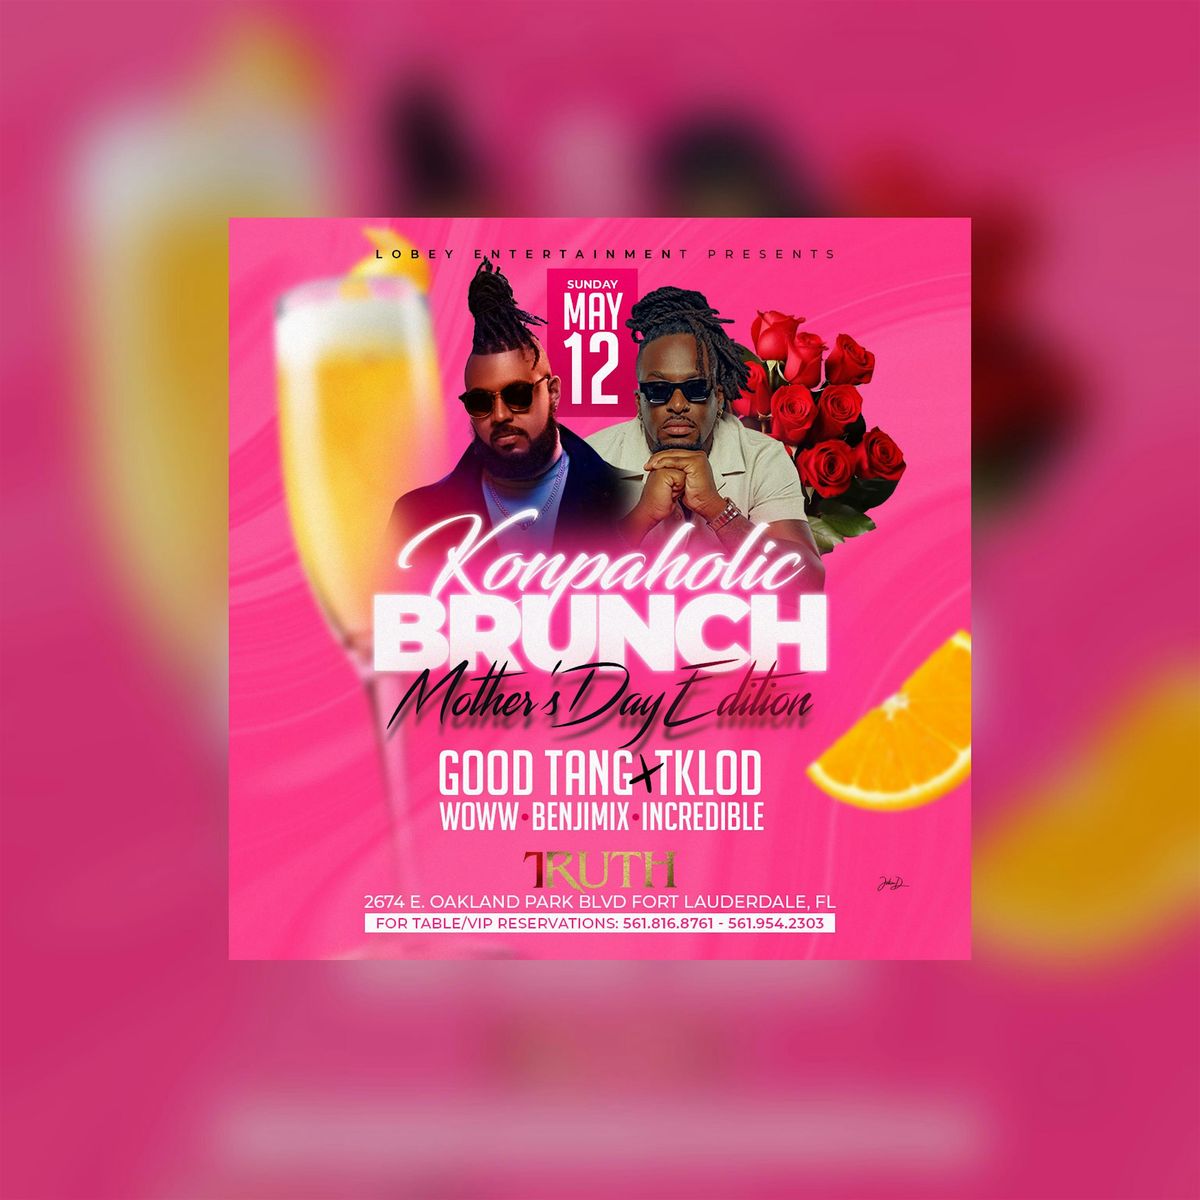 Konpaholic Brunch Mothers Day Edition